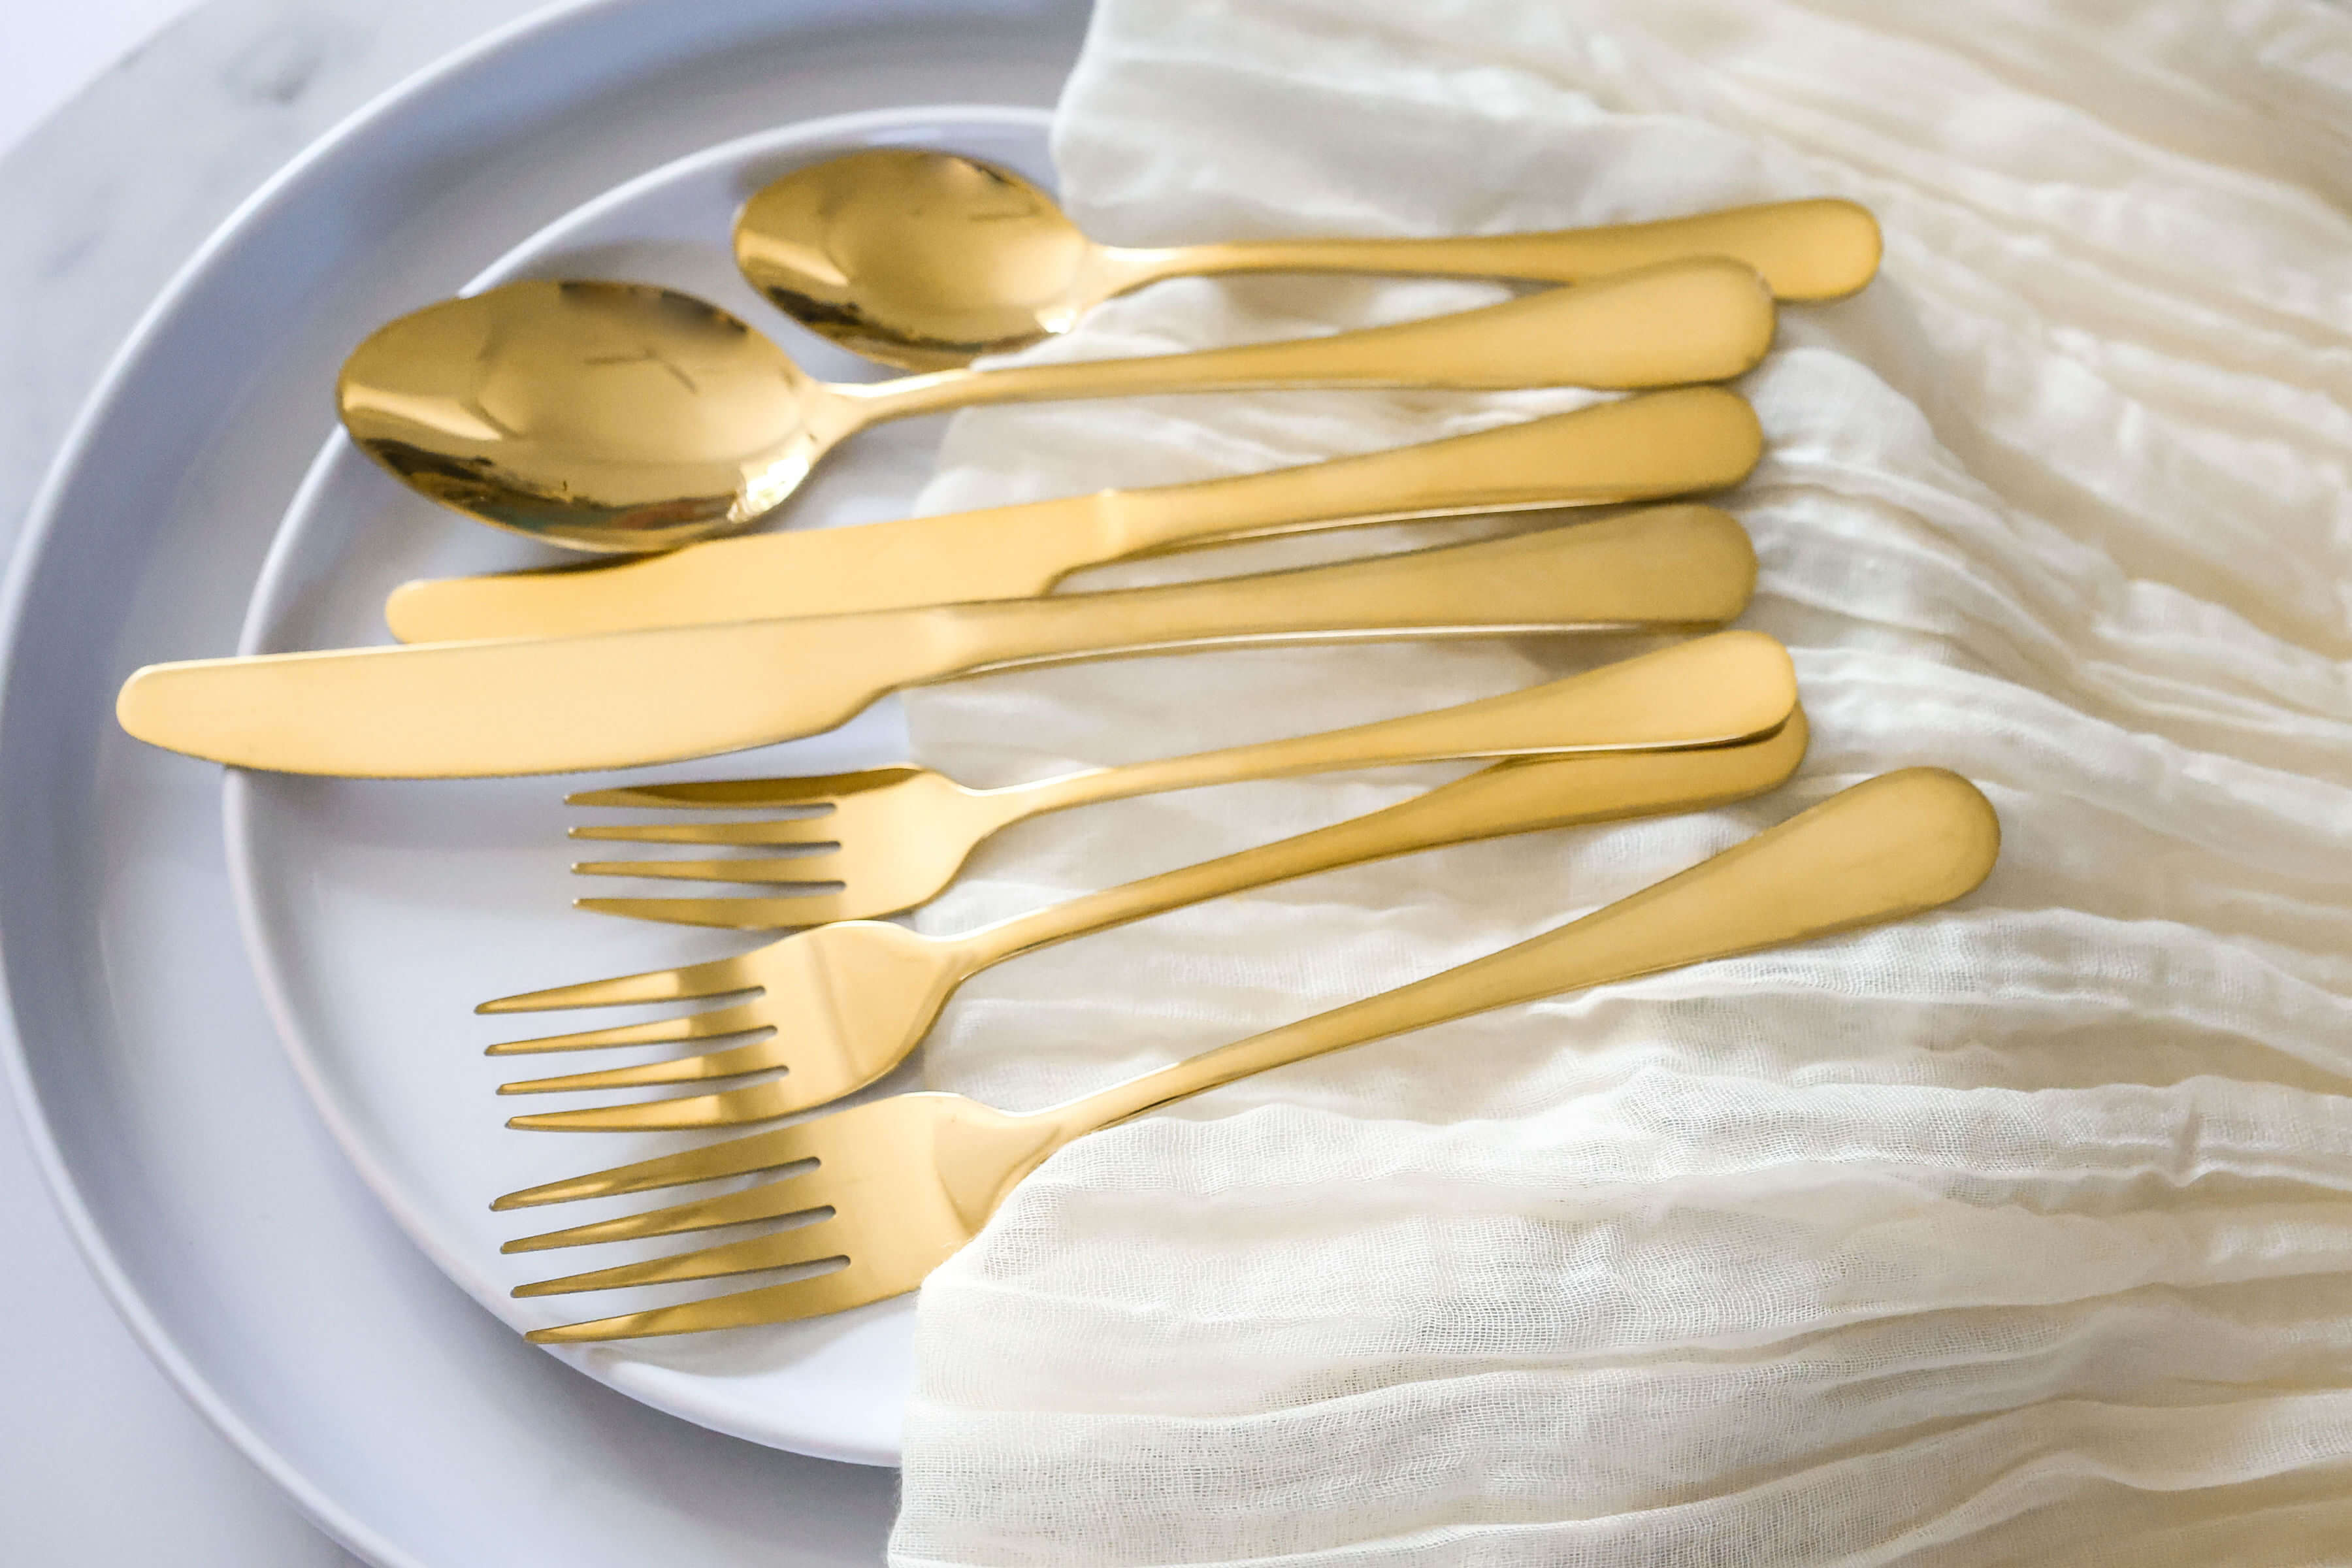 Complete set of gold plated flatware and cutlery